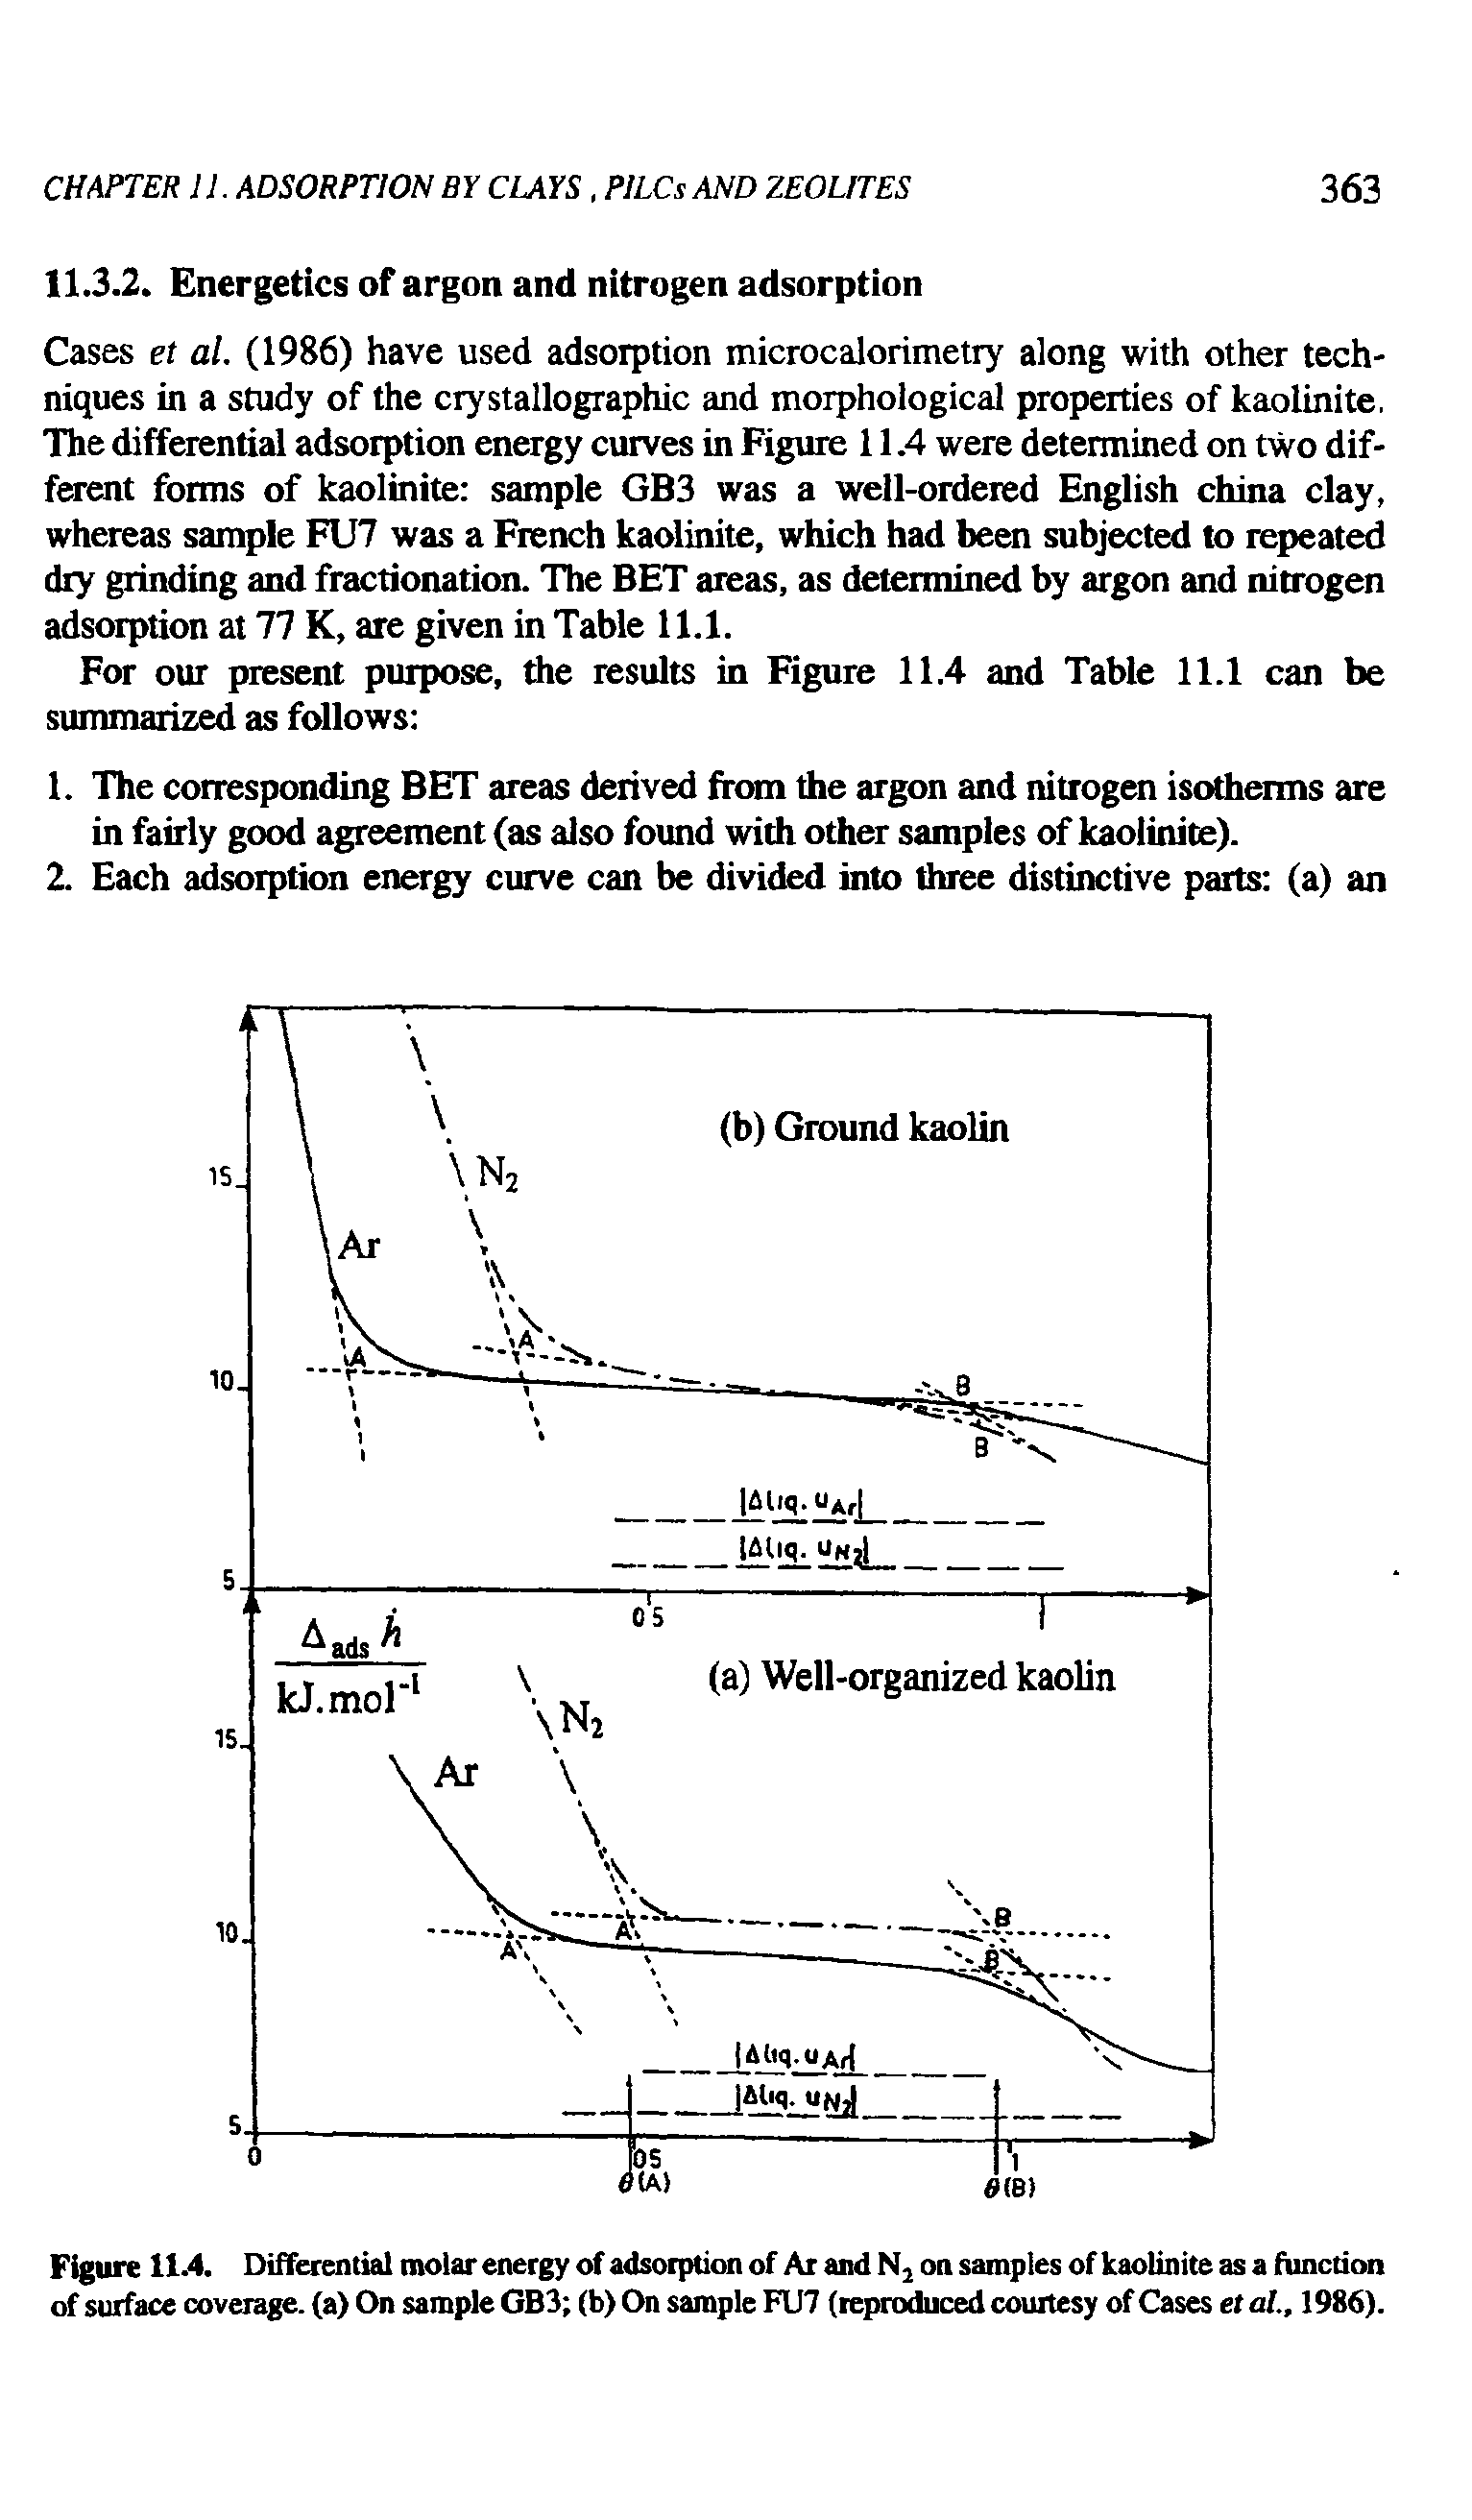 Figure 11.4. Differential molar energy of adsorption of Ar and N2 on samples of kaolinite as a function of surface coverage, (a) On sample GB3 (b) On sample FU7 (reproduced courtesy of Cases et al., 1986).